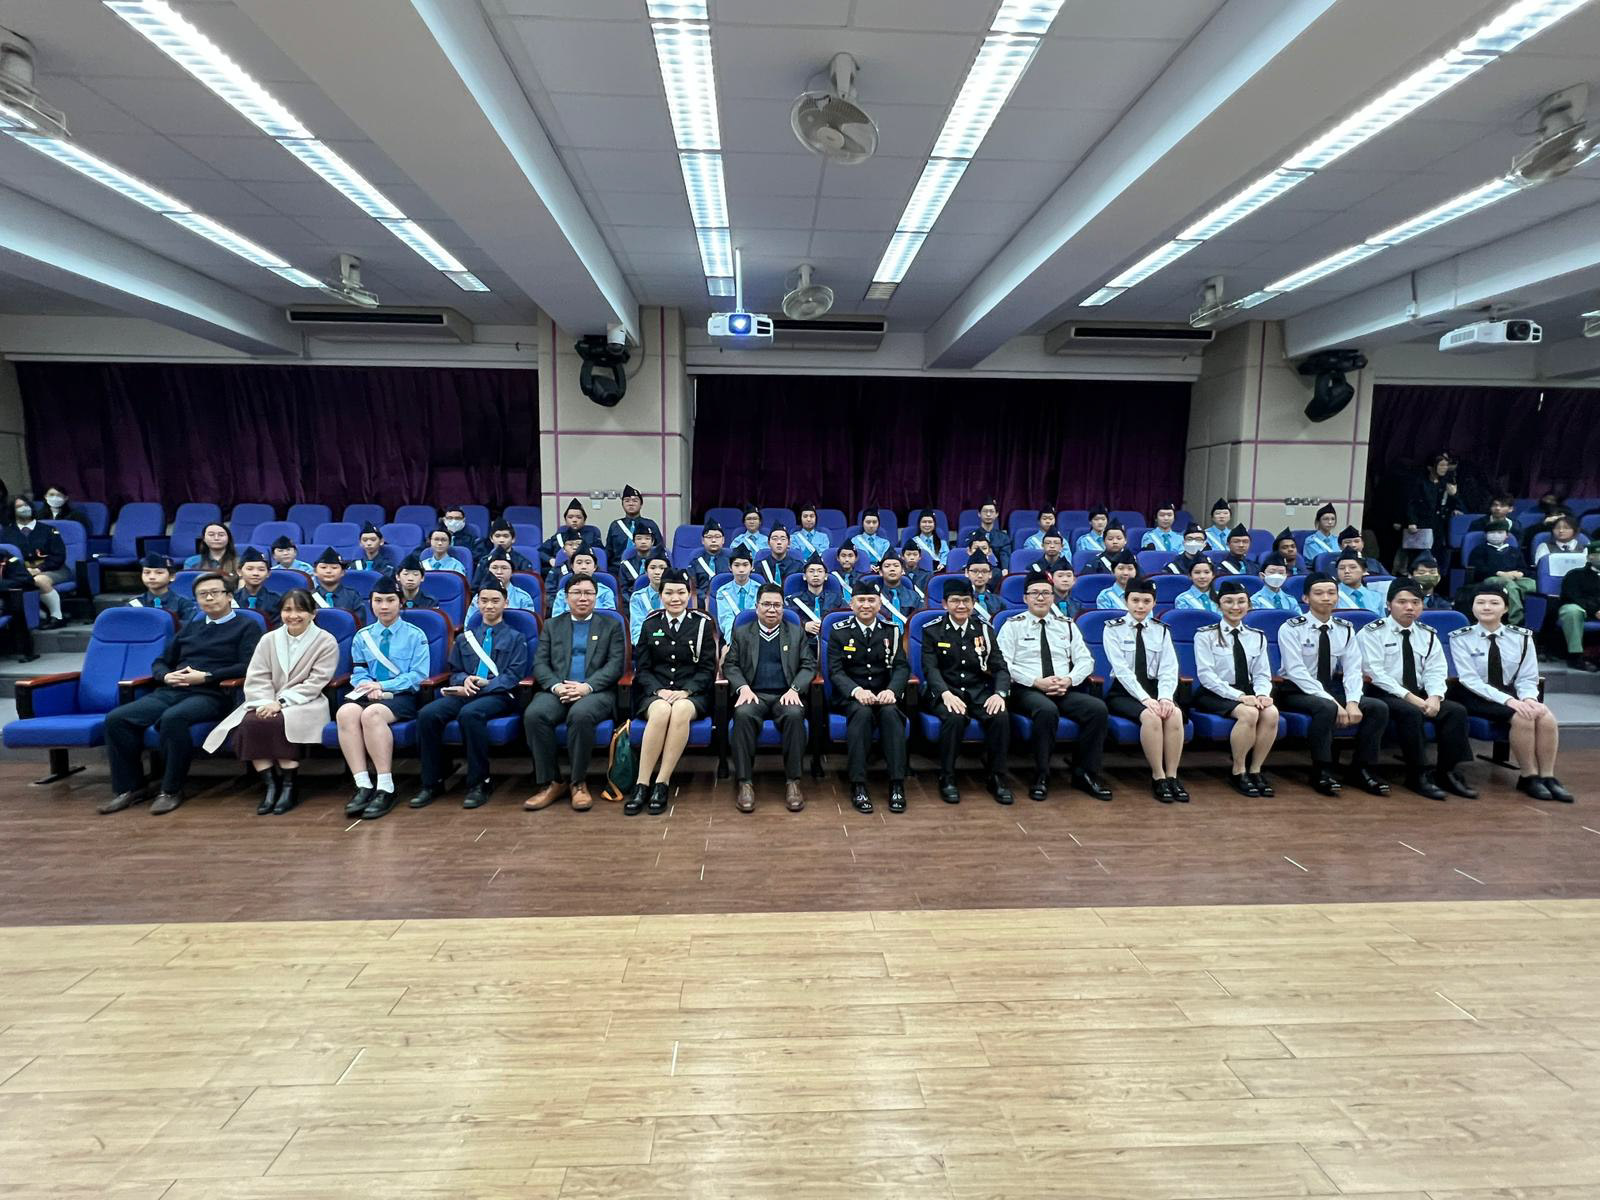 The 16th enrolment service of the 251th Company of The Boys’ Brigade, Hong Kong